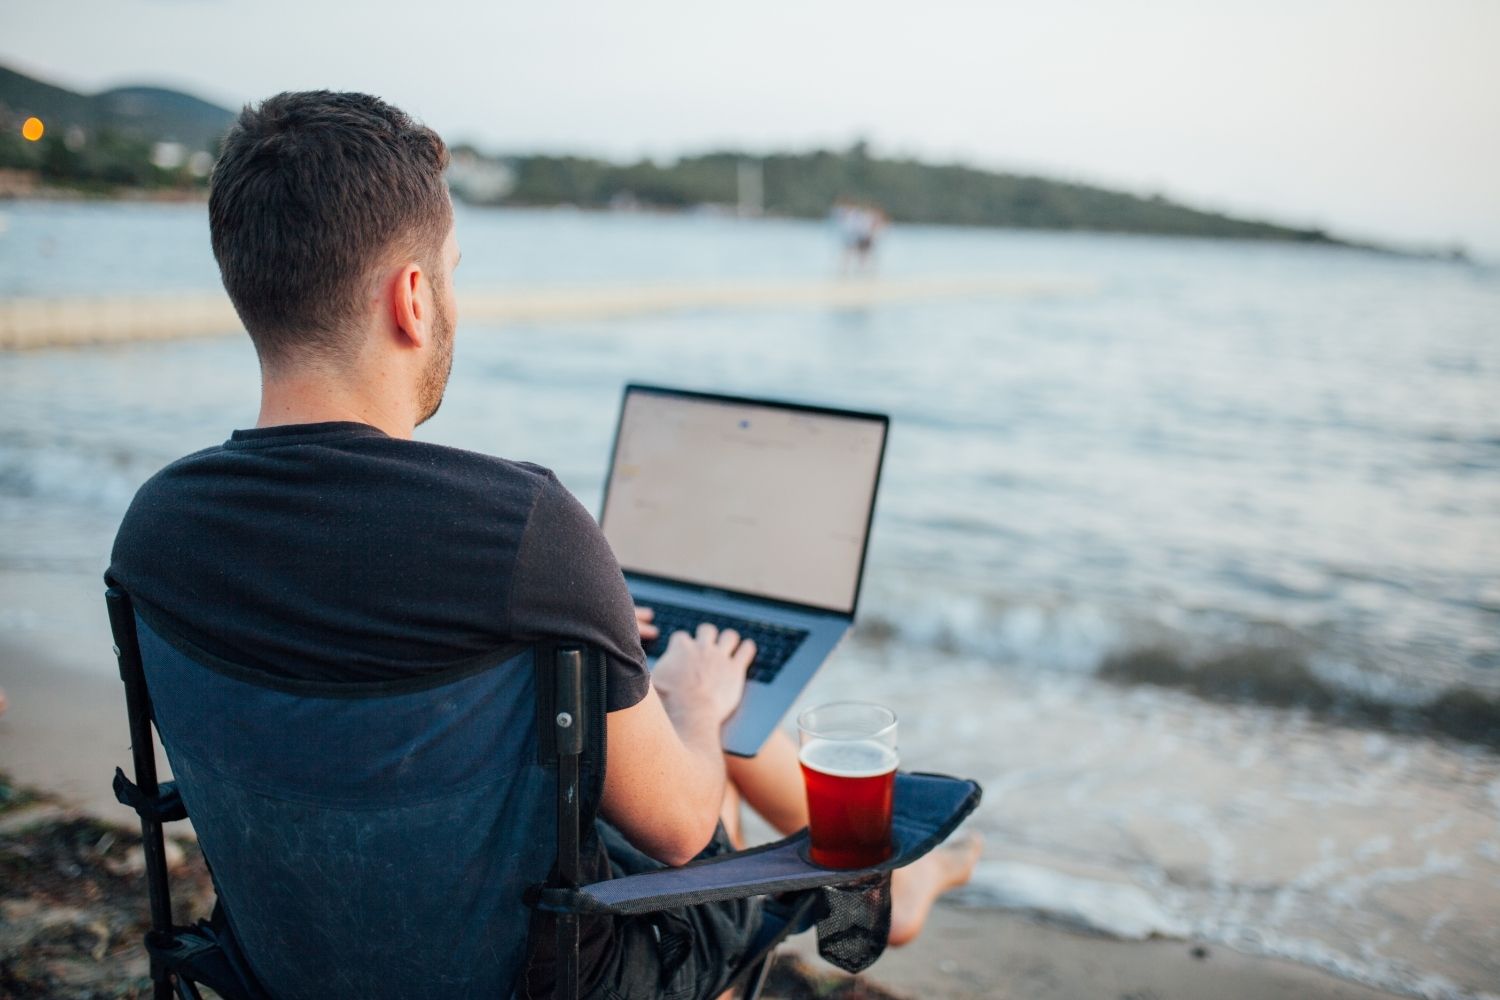 How To Start Working Remotely Even If You Don't Have Any Experience 52